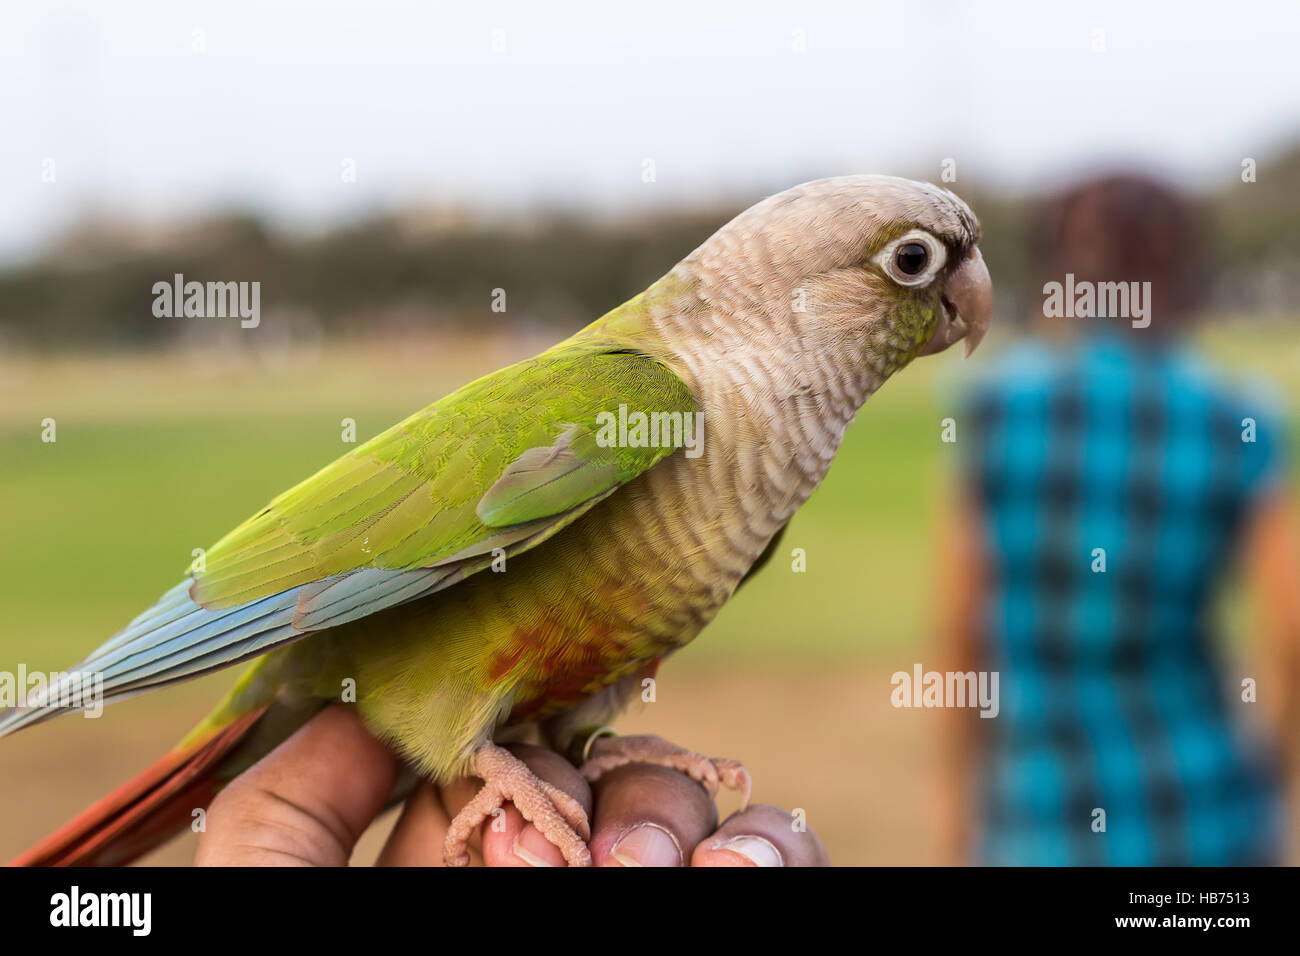 Cute Parrot on the hand in the park Stock Photo - Alamy